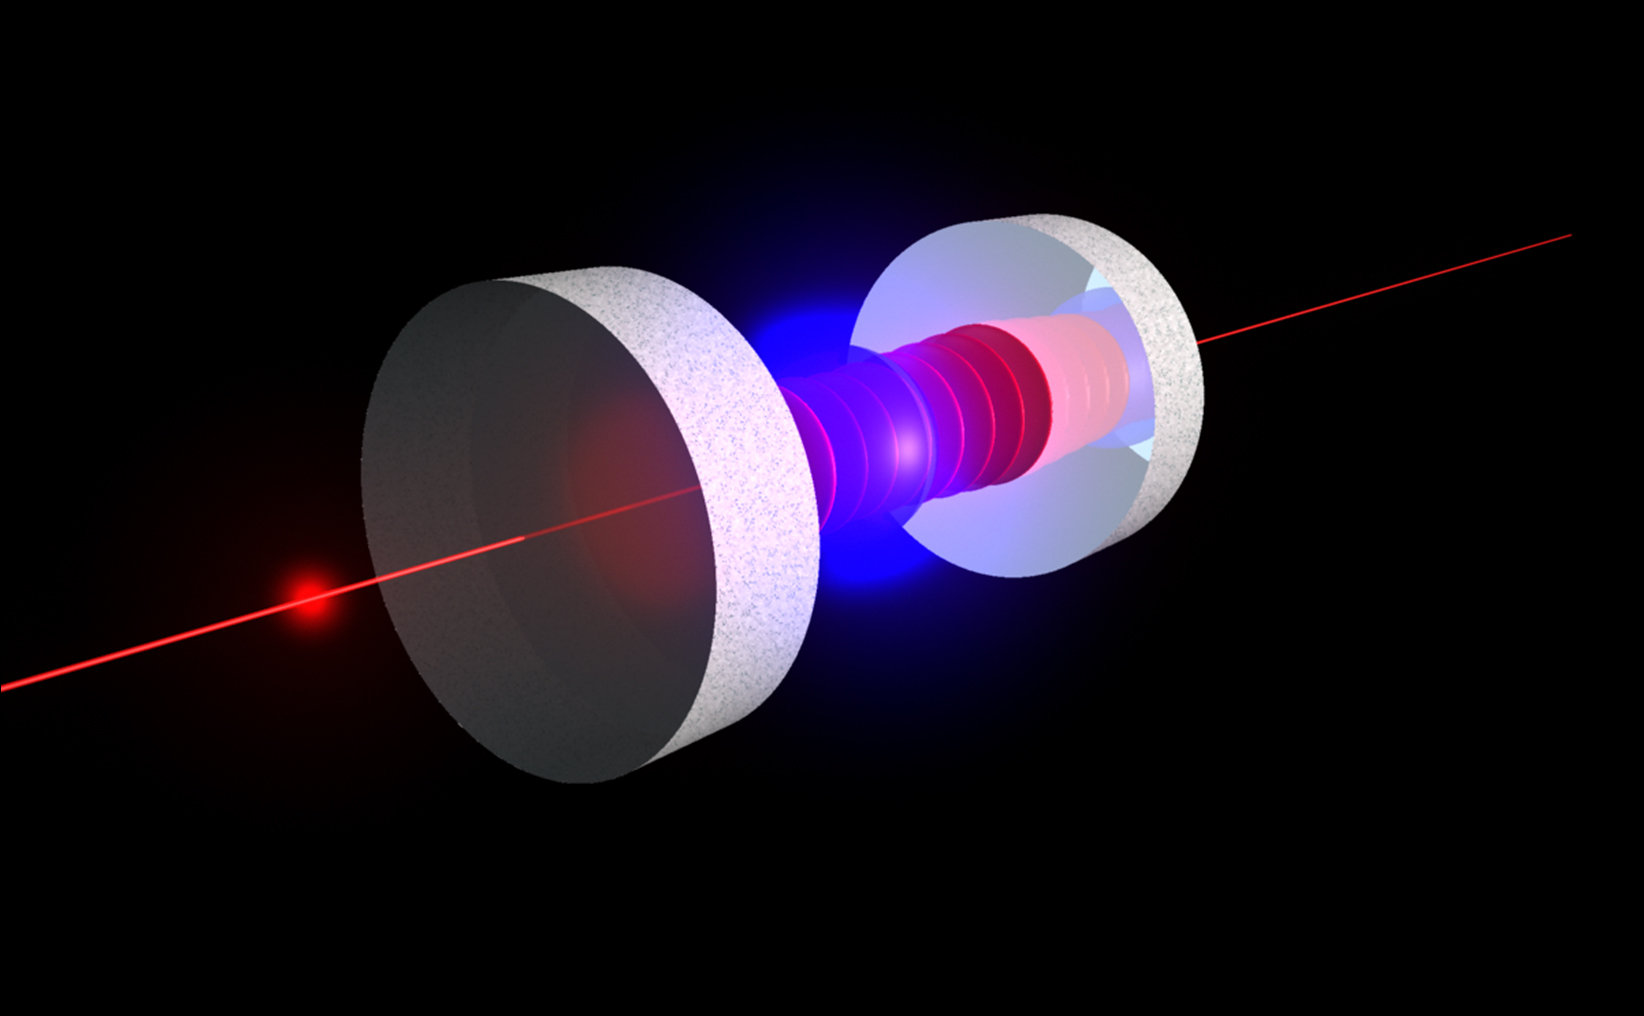 At the Institute for Quantum Electronics at ETH Zurich, photons are amplified using two mirrors for various experiments in basic research.